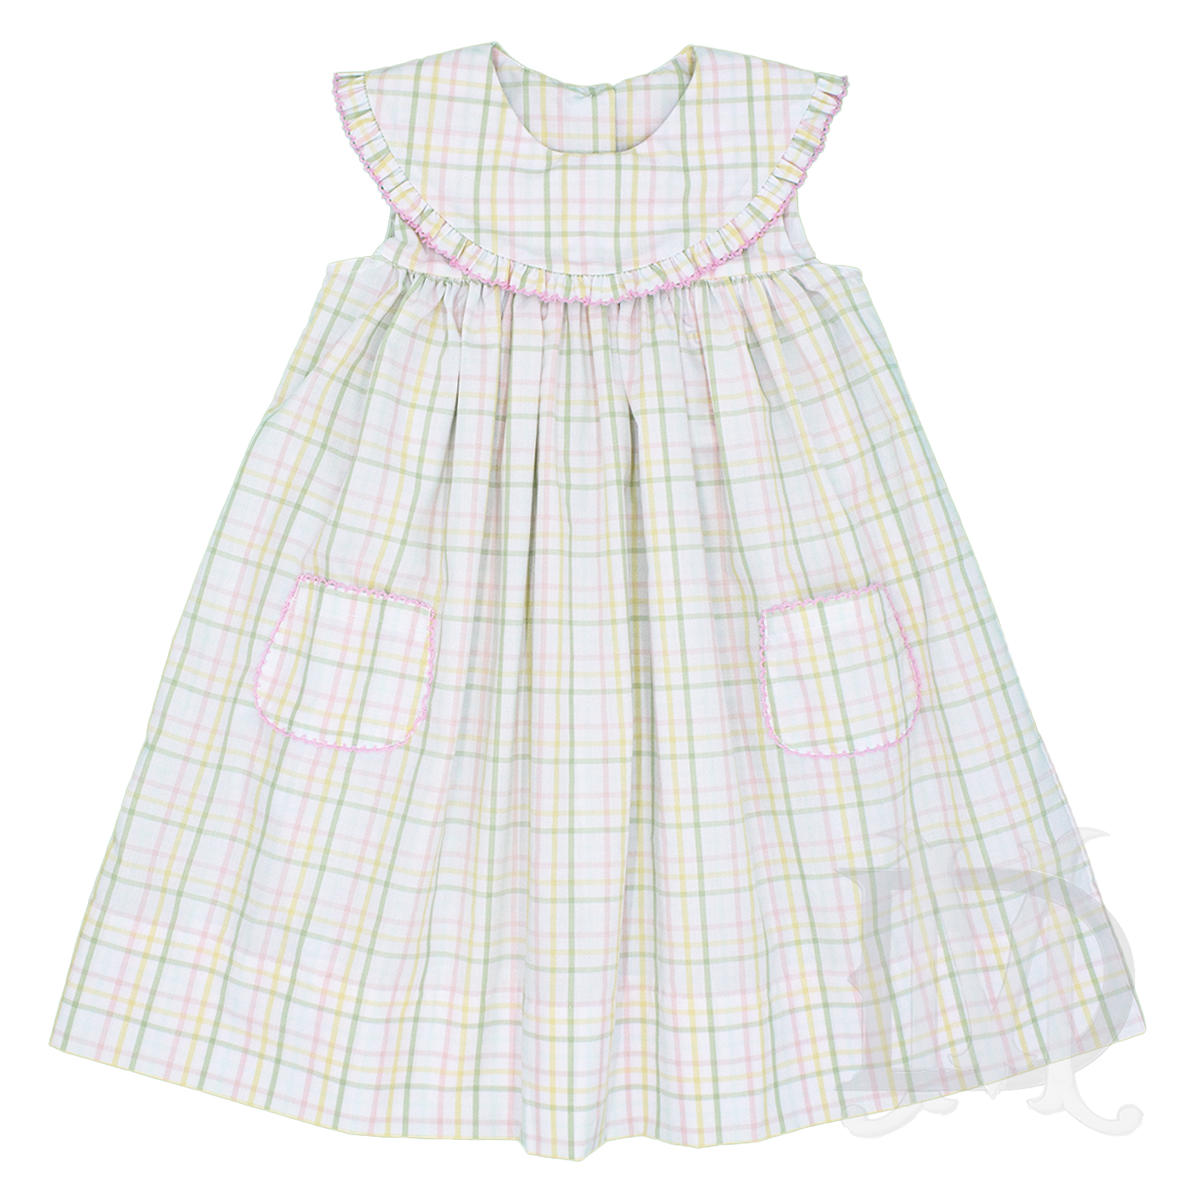 Girl's Spring Plaid Round Collar Dress by Delaney